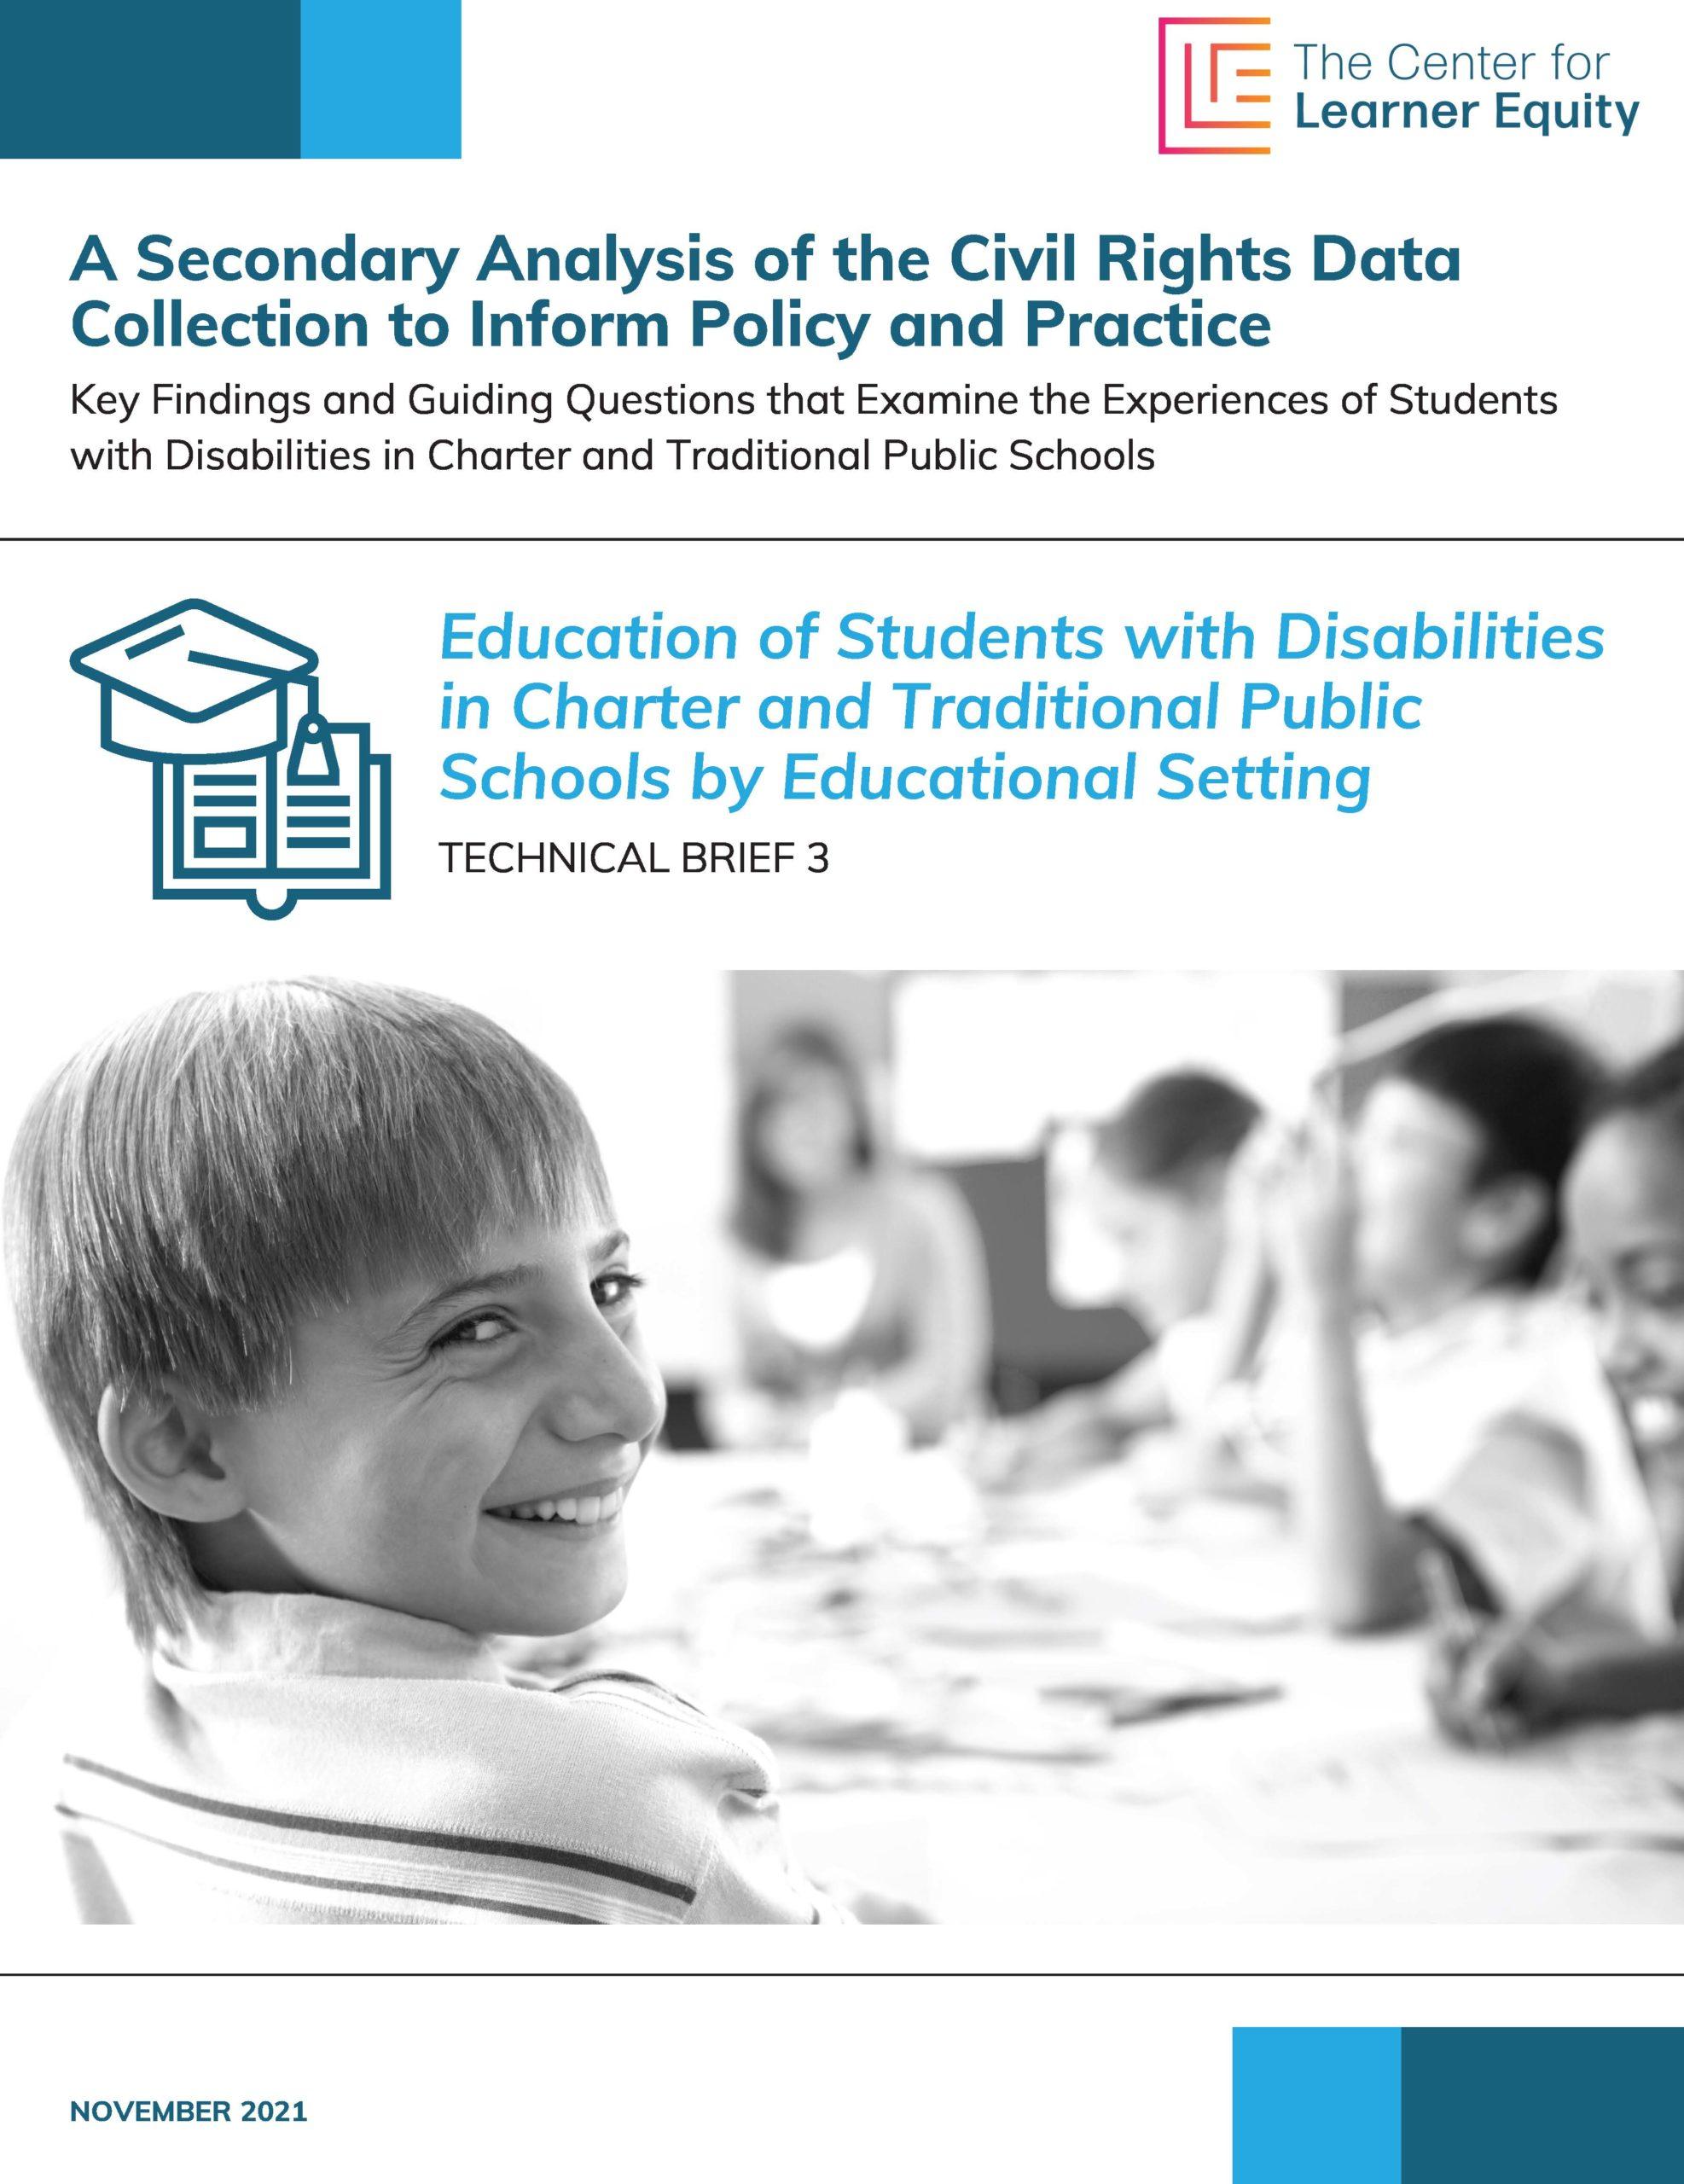 Secondary Analyses of Data on Early Care and Education Grants